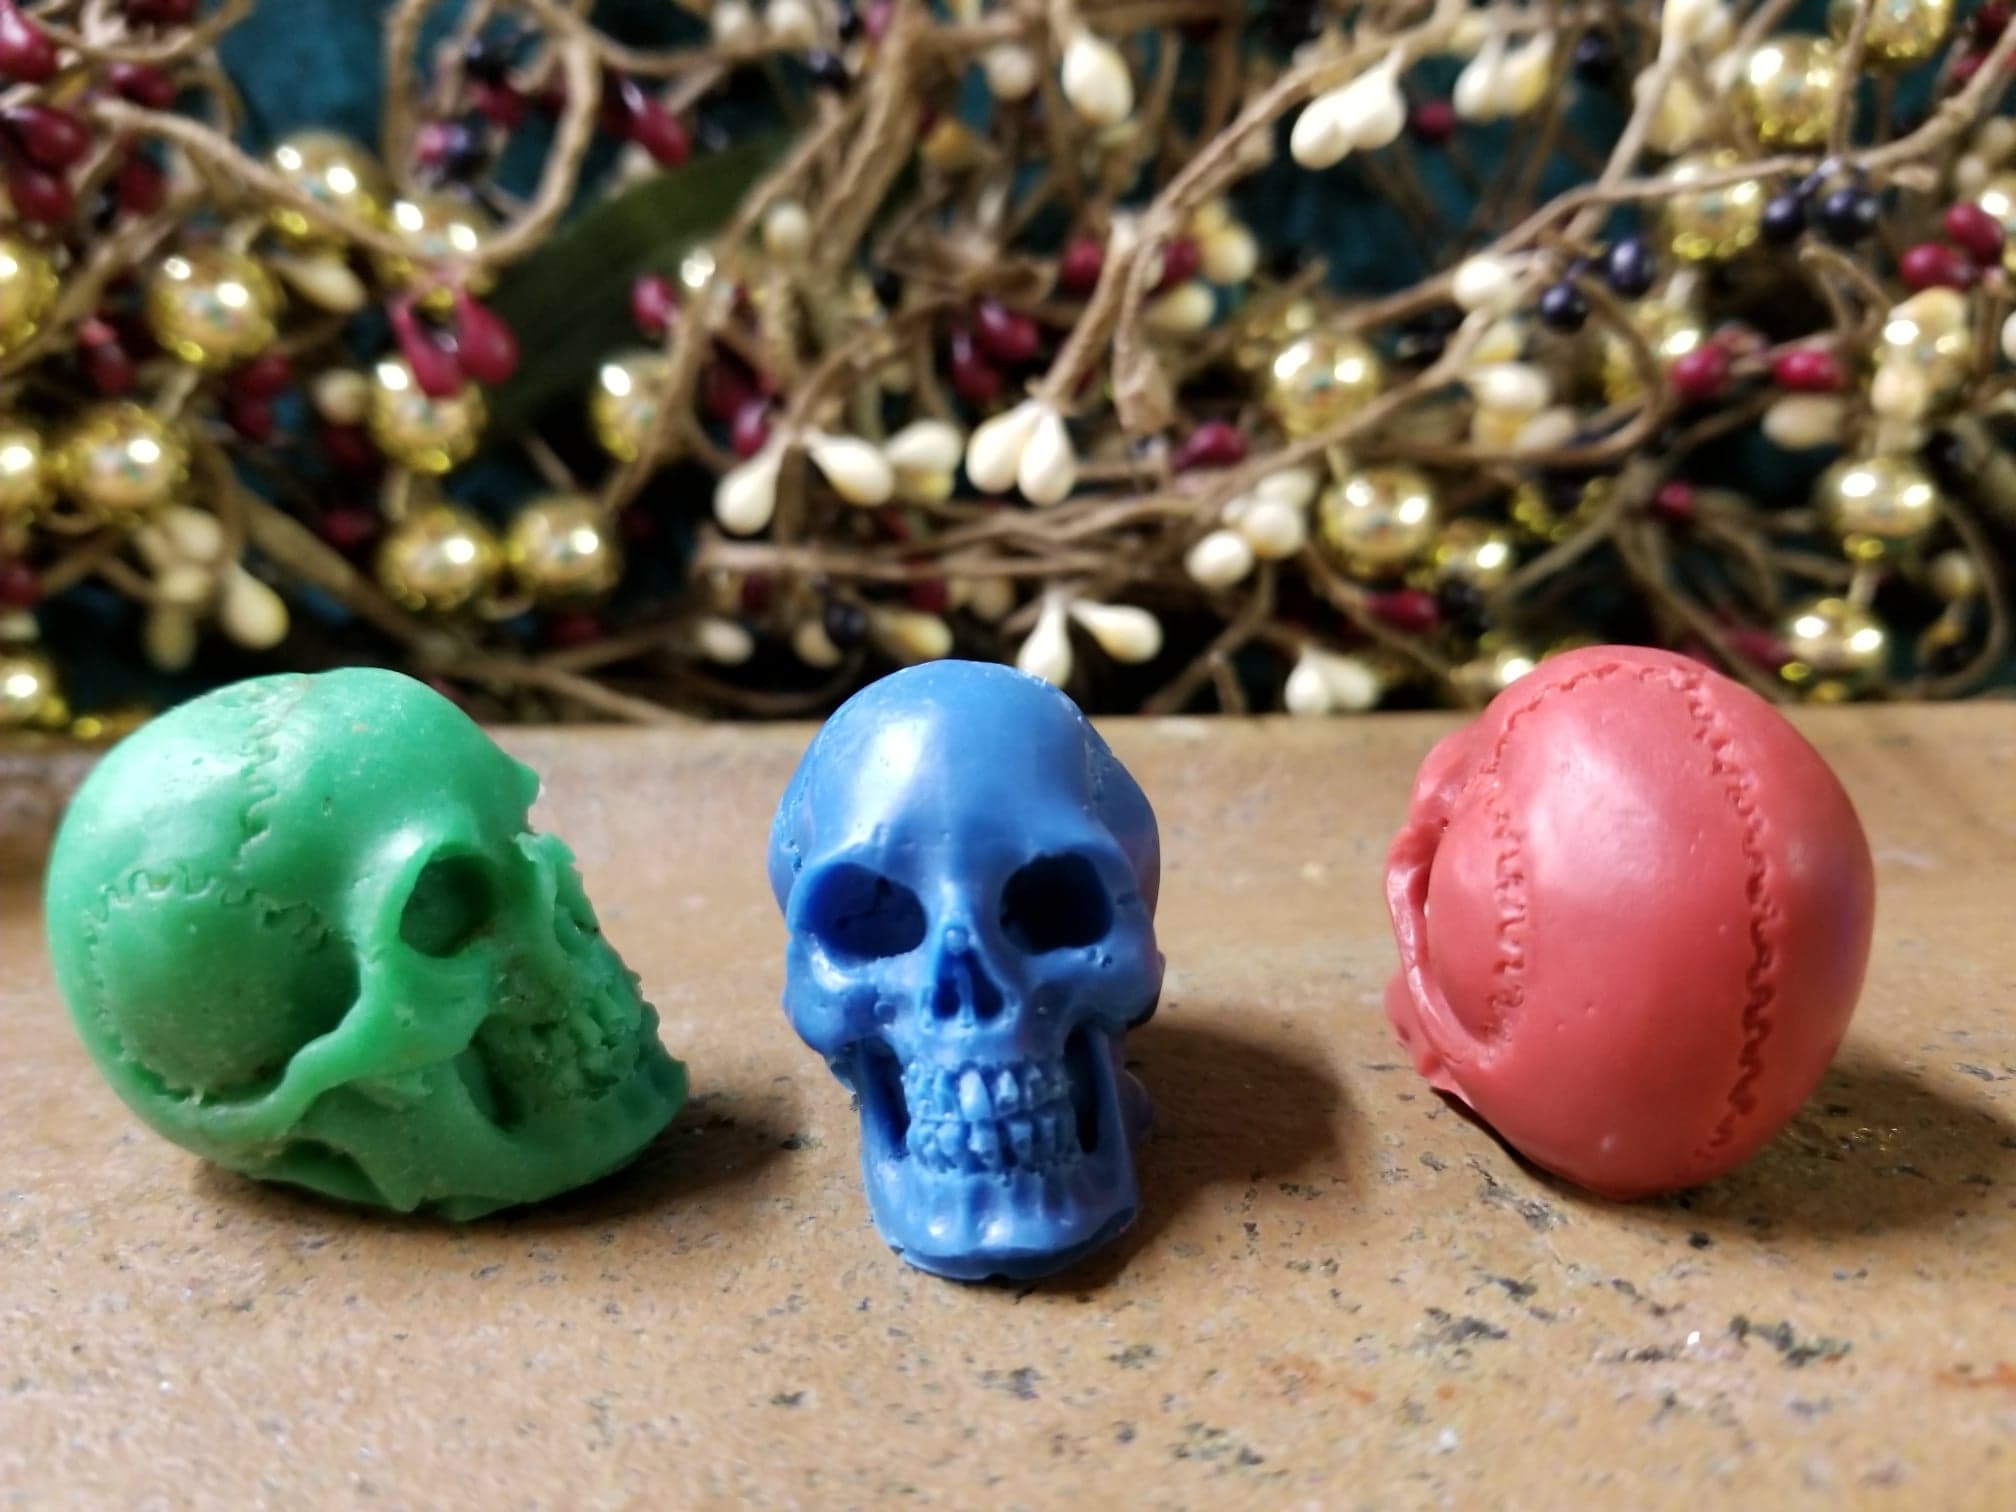 https://www.vanyulay.com/wp-content/uploads/2018/07/Skull-Embed-Silicone-Mold-5532-4.jpg